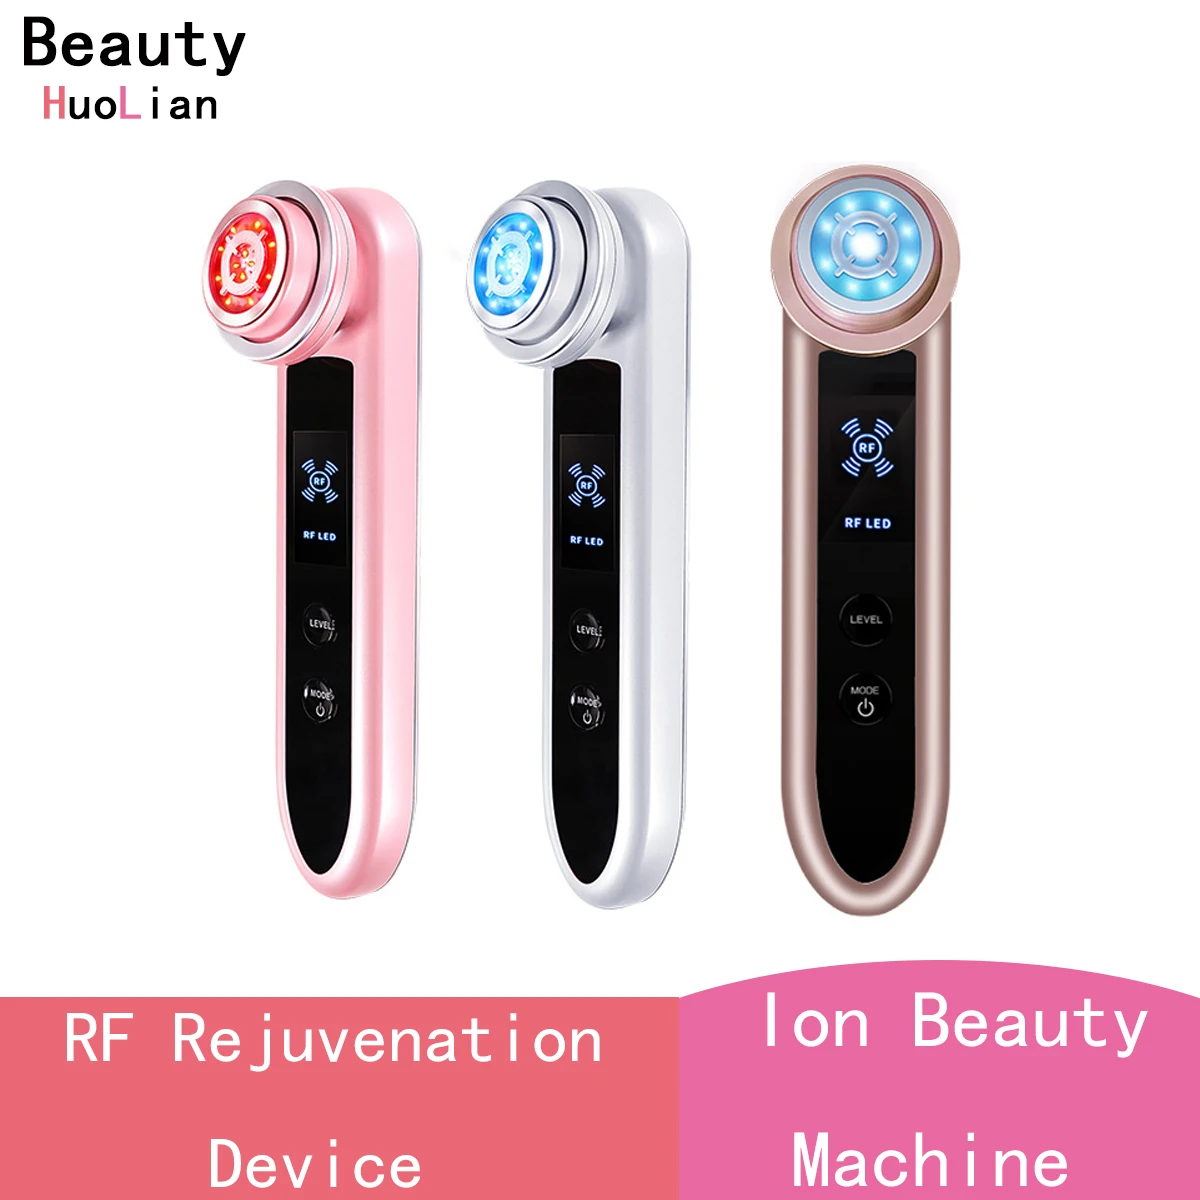 Facial Radio Frequency Beauty Instrument for Face Lifting Firming Red Blue Light Ion Import Export Device Using in Winter